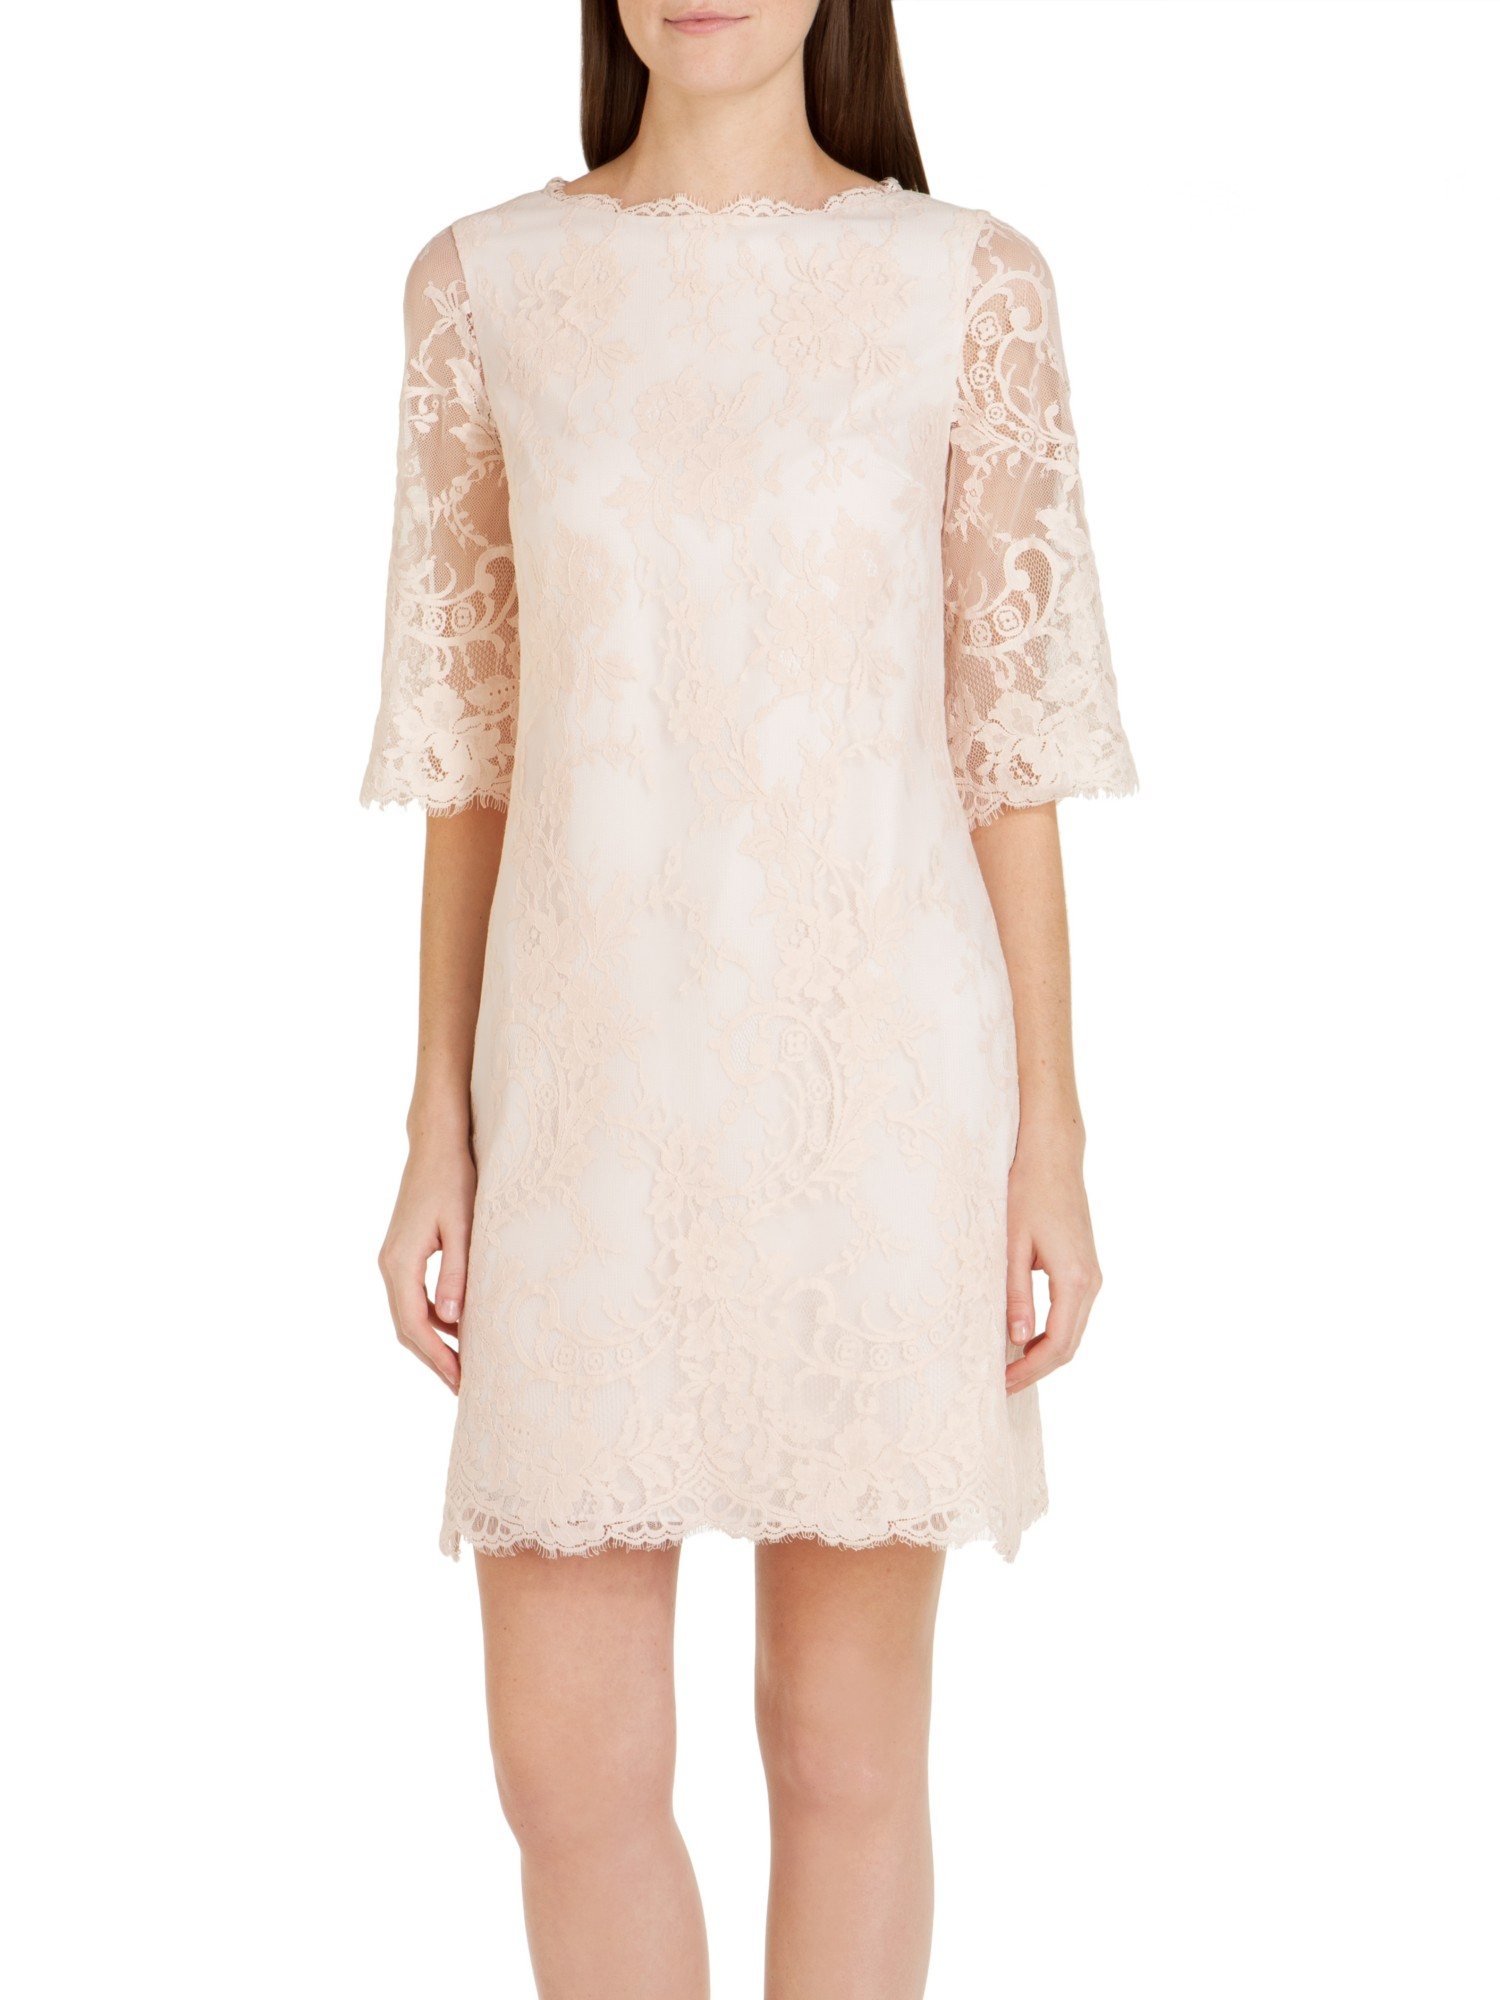 Lyst - Ted Baker Laavia Wide Sleeve Lace Dress in Pink